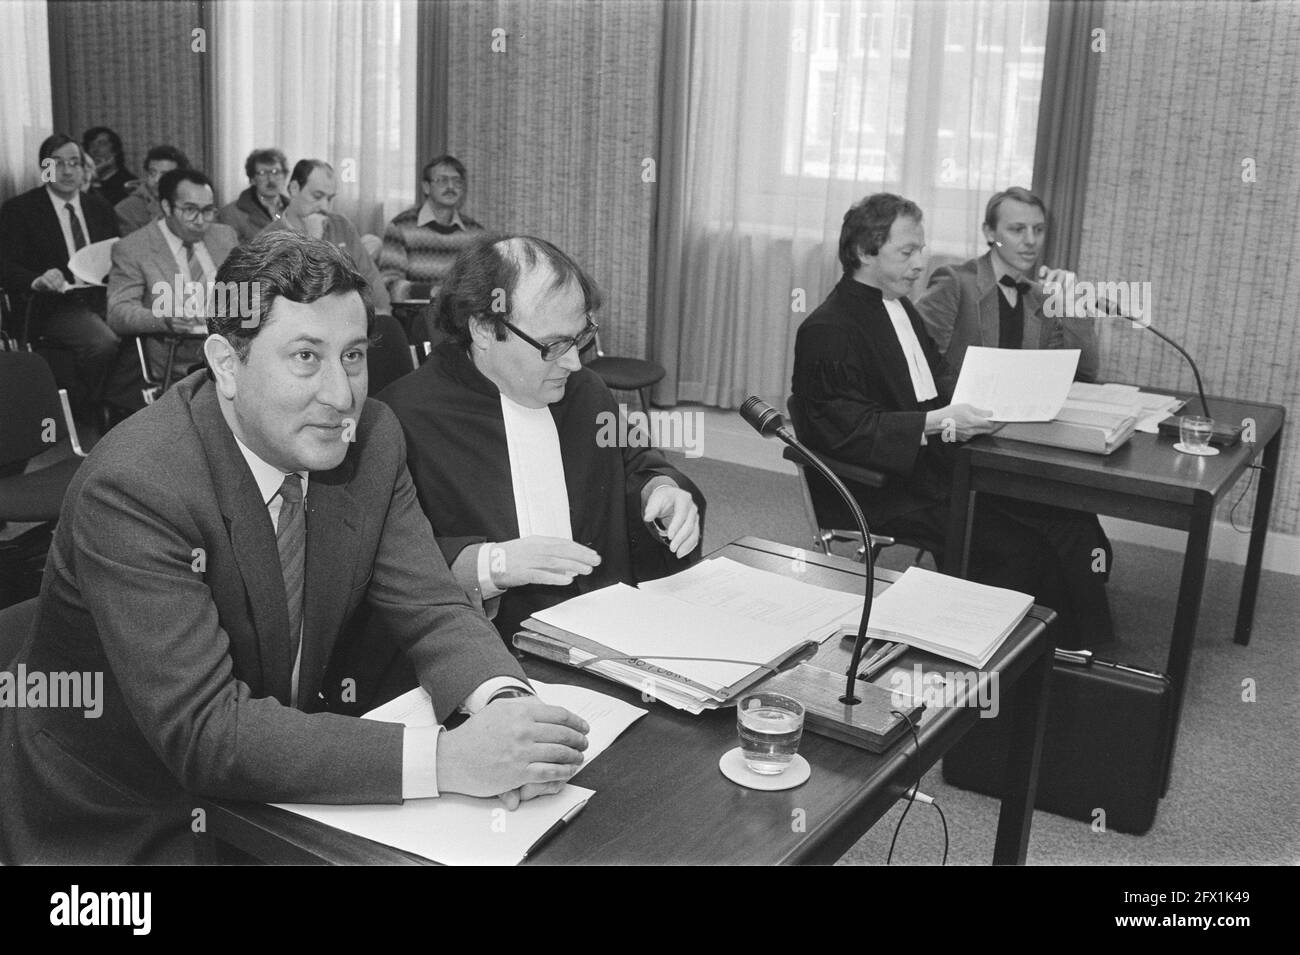 Summary proceedings vice council AVRO against appointment Wibo van der Linde, AVRO chairman Wallis de Vries (l) and Jan Taat (r) (vzt or), 19 March 1984, GEDING, works councils, The Netherlands, 20th century press agency photo, news to remember, documentary, historic photography 1945-1990, visual stories, human history of the Twentieth Century, capturing moments in time Stock Photo